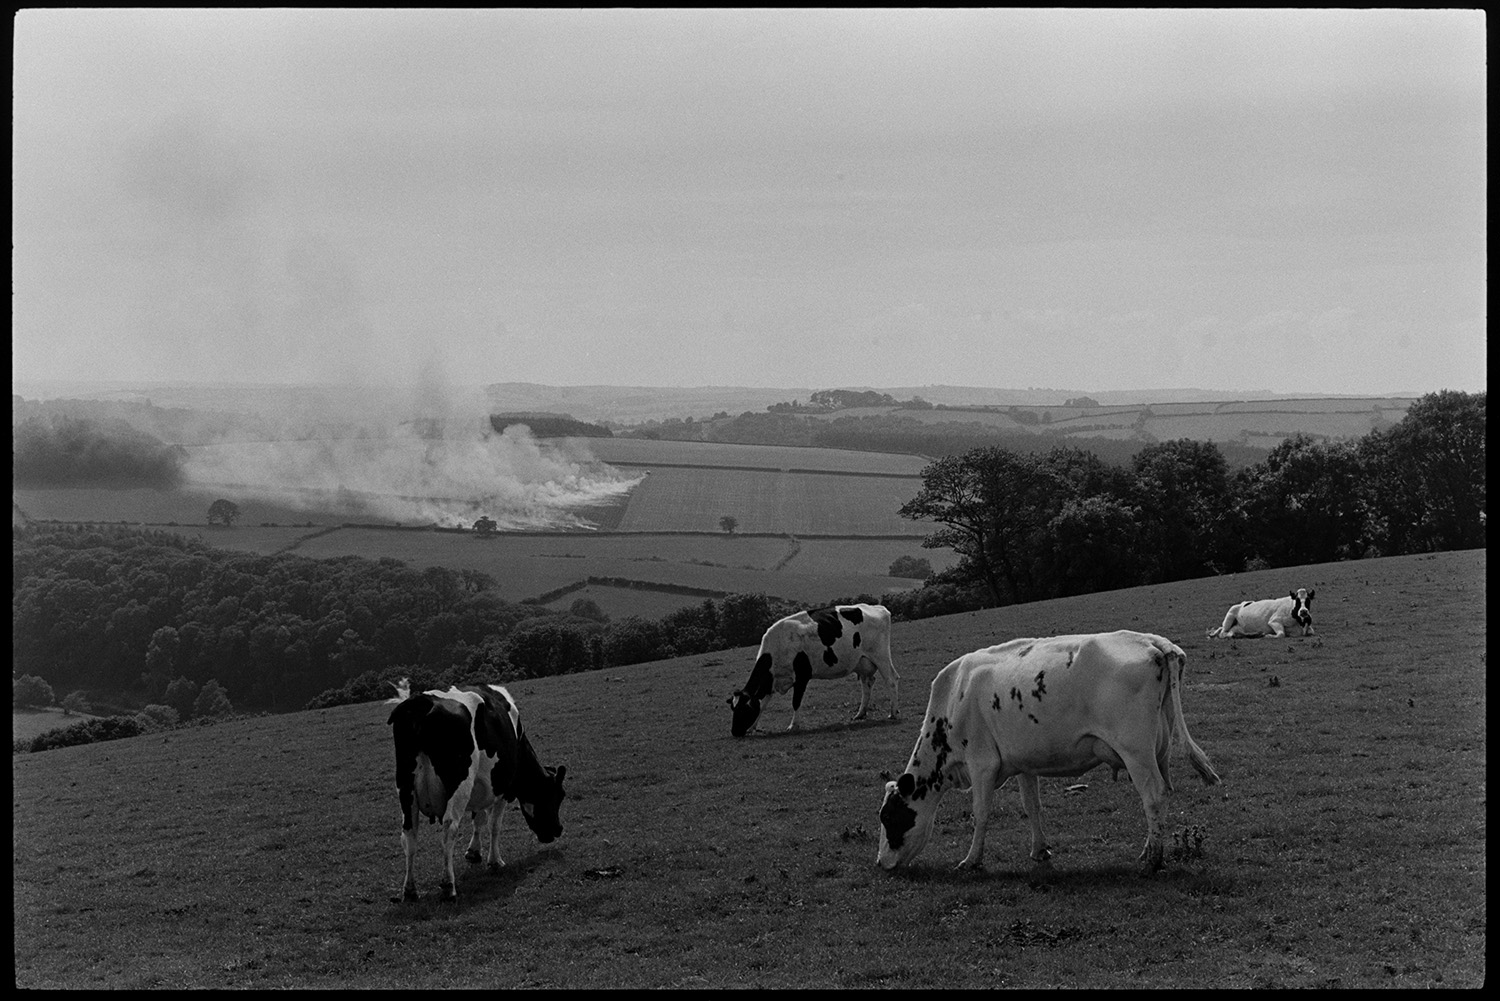 Cows in landscape with stubble burning fire in distance.
[Four cows grazing in a field above a wooded valley at South Harepath, Dolton. Smoke from burning stubble in a field is visible in the background.]